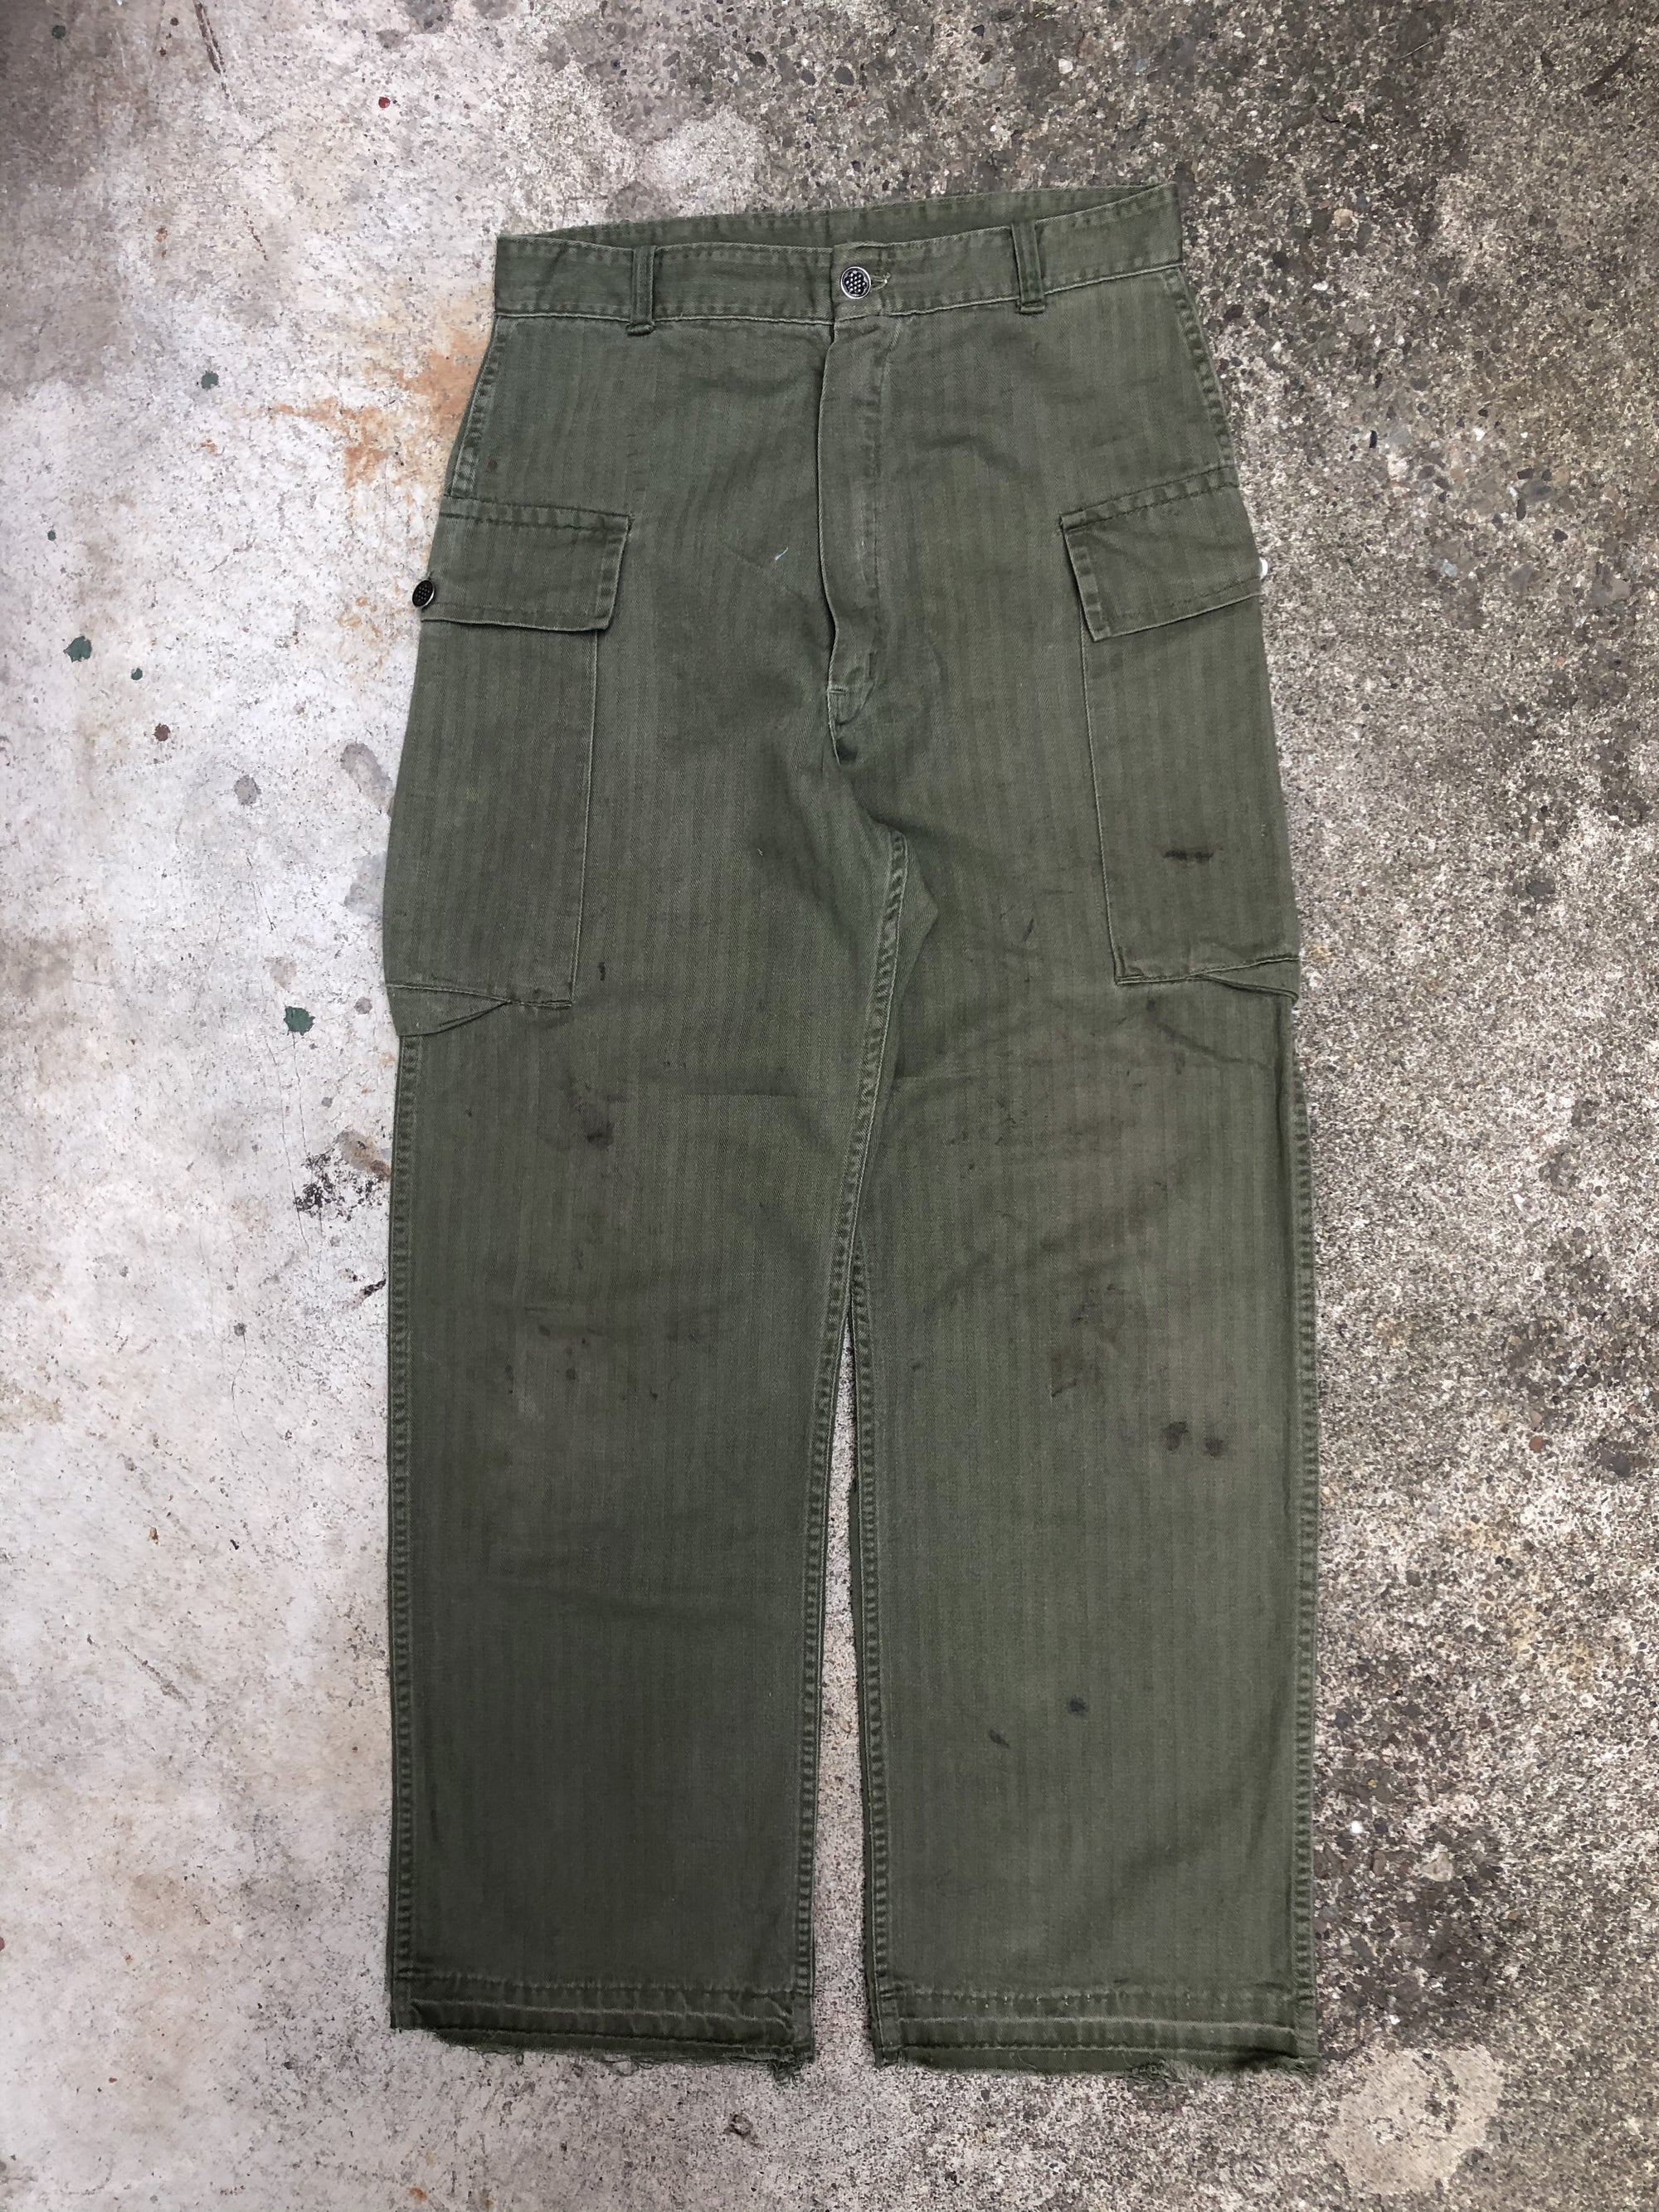 1950s WWII Faded US Army 13 Star Cargo Field Pants (28X27)